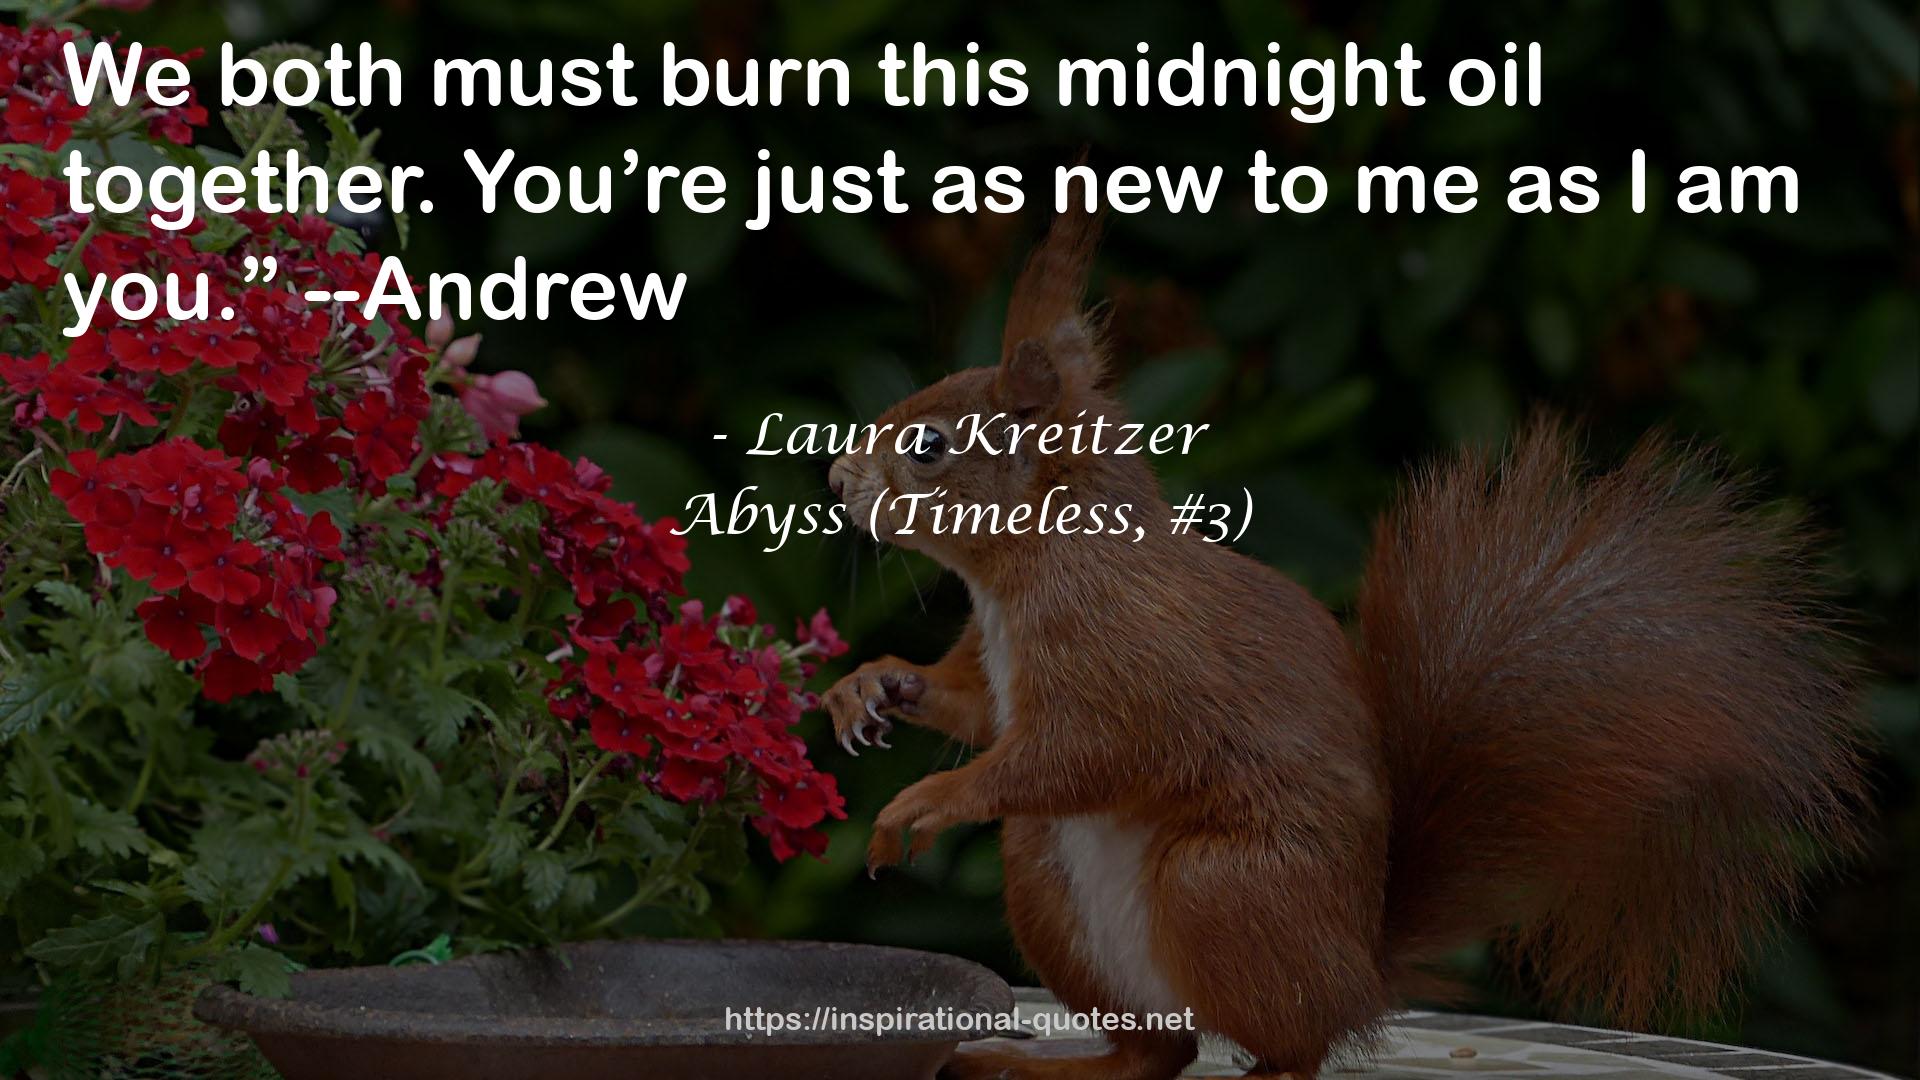 Abyss (Timeless, #3) QUOTES